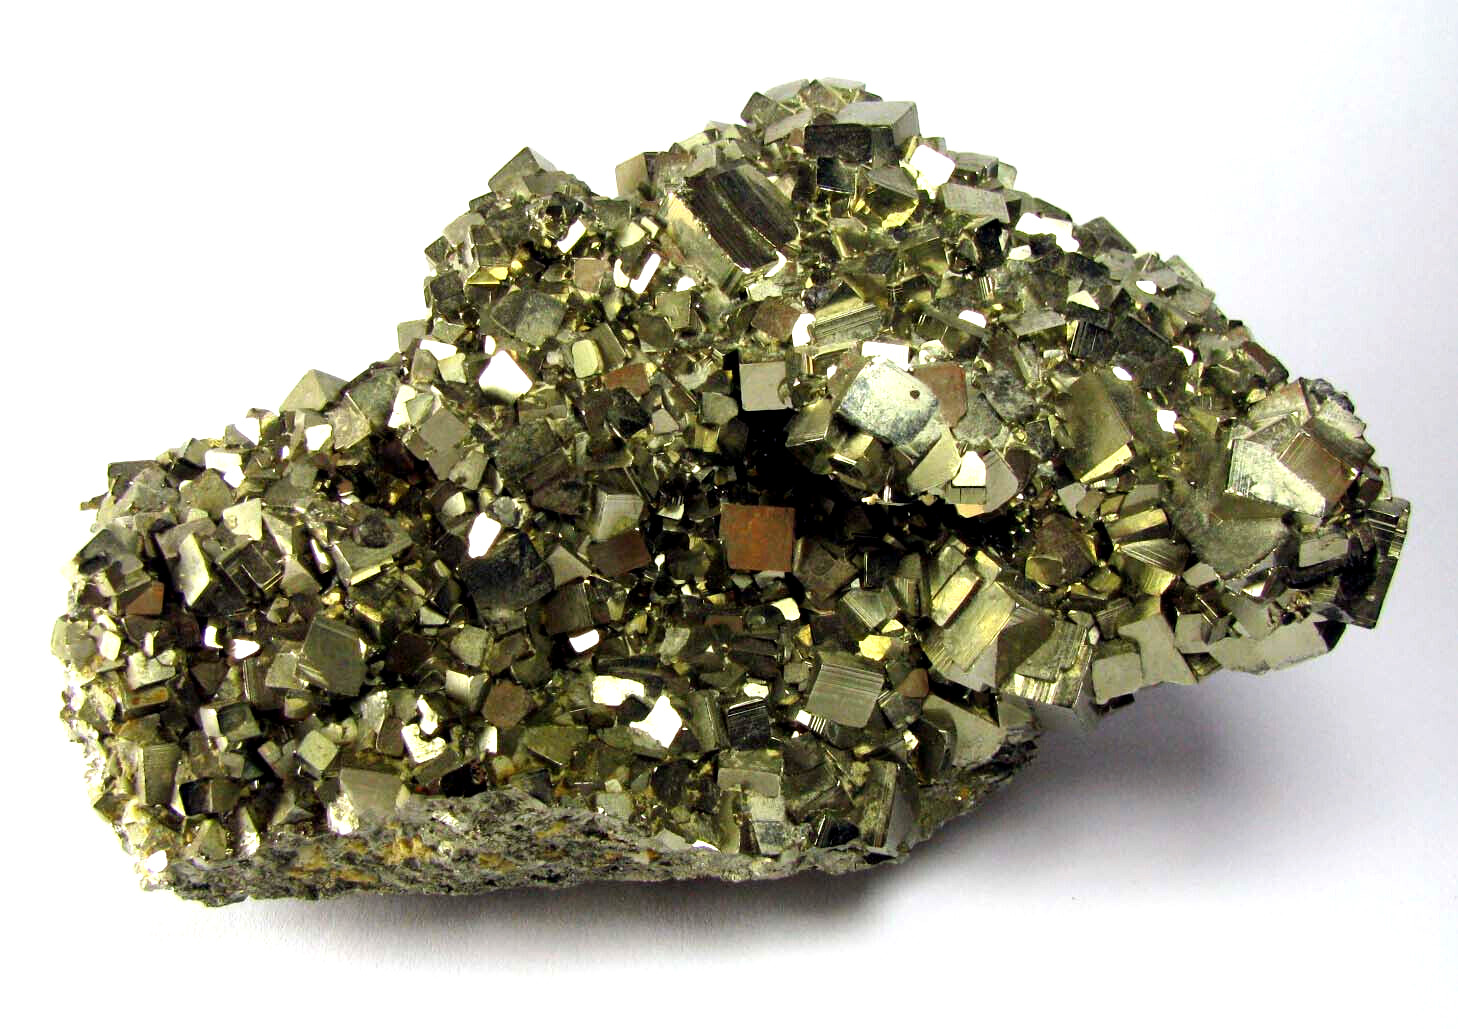 PYRITE BRILLIANT CUBIC CRYSTALS on MATRIX from PERU...OUTSTANDING QUALITY PYRITE